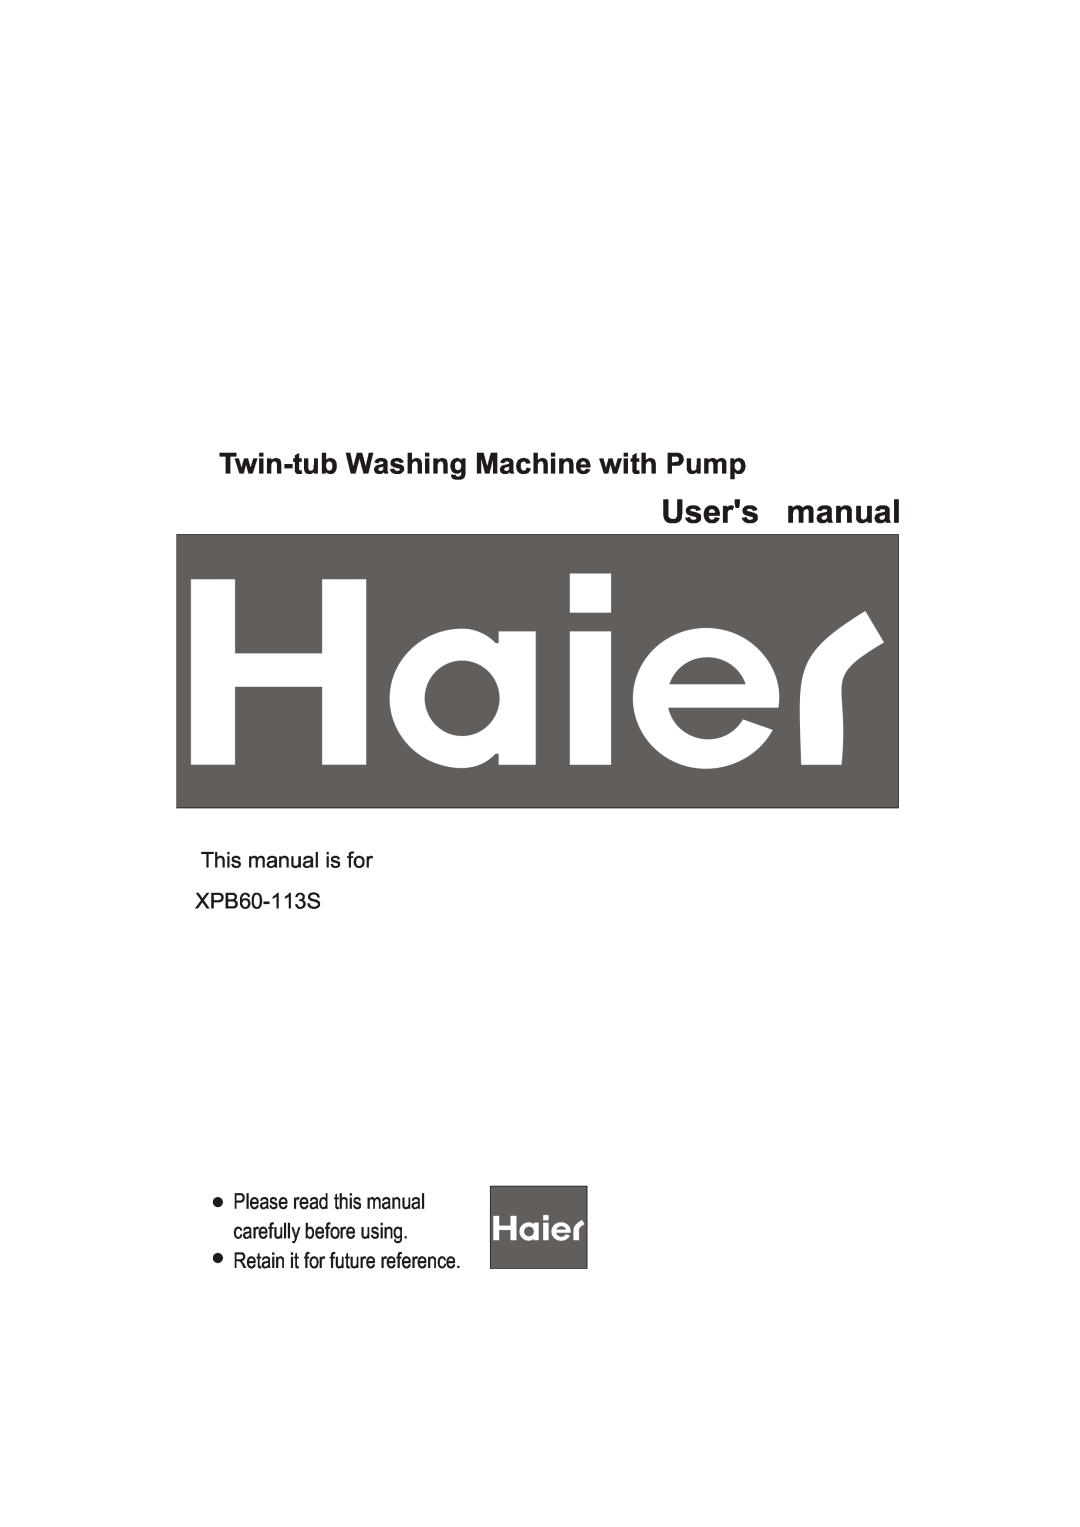 Haier user manual Users manual, Twin-tub Washing Machine with Pump, This manual is for XPB60-113S 